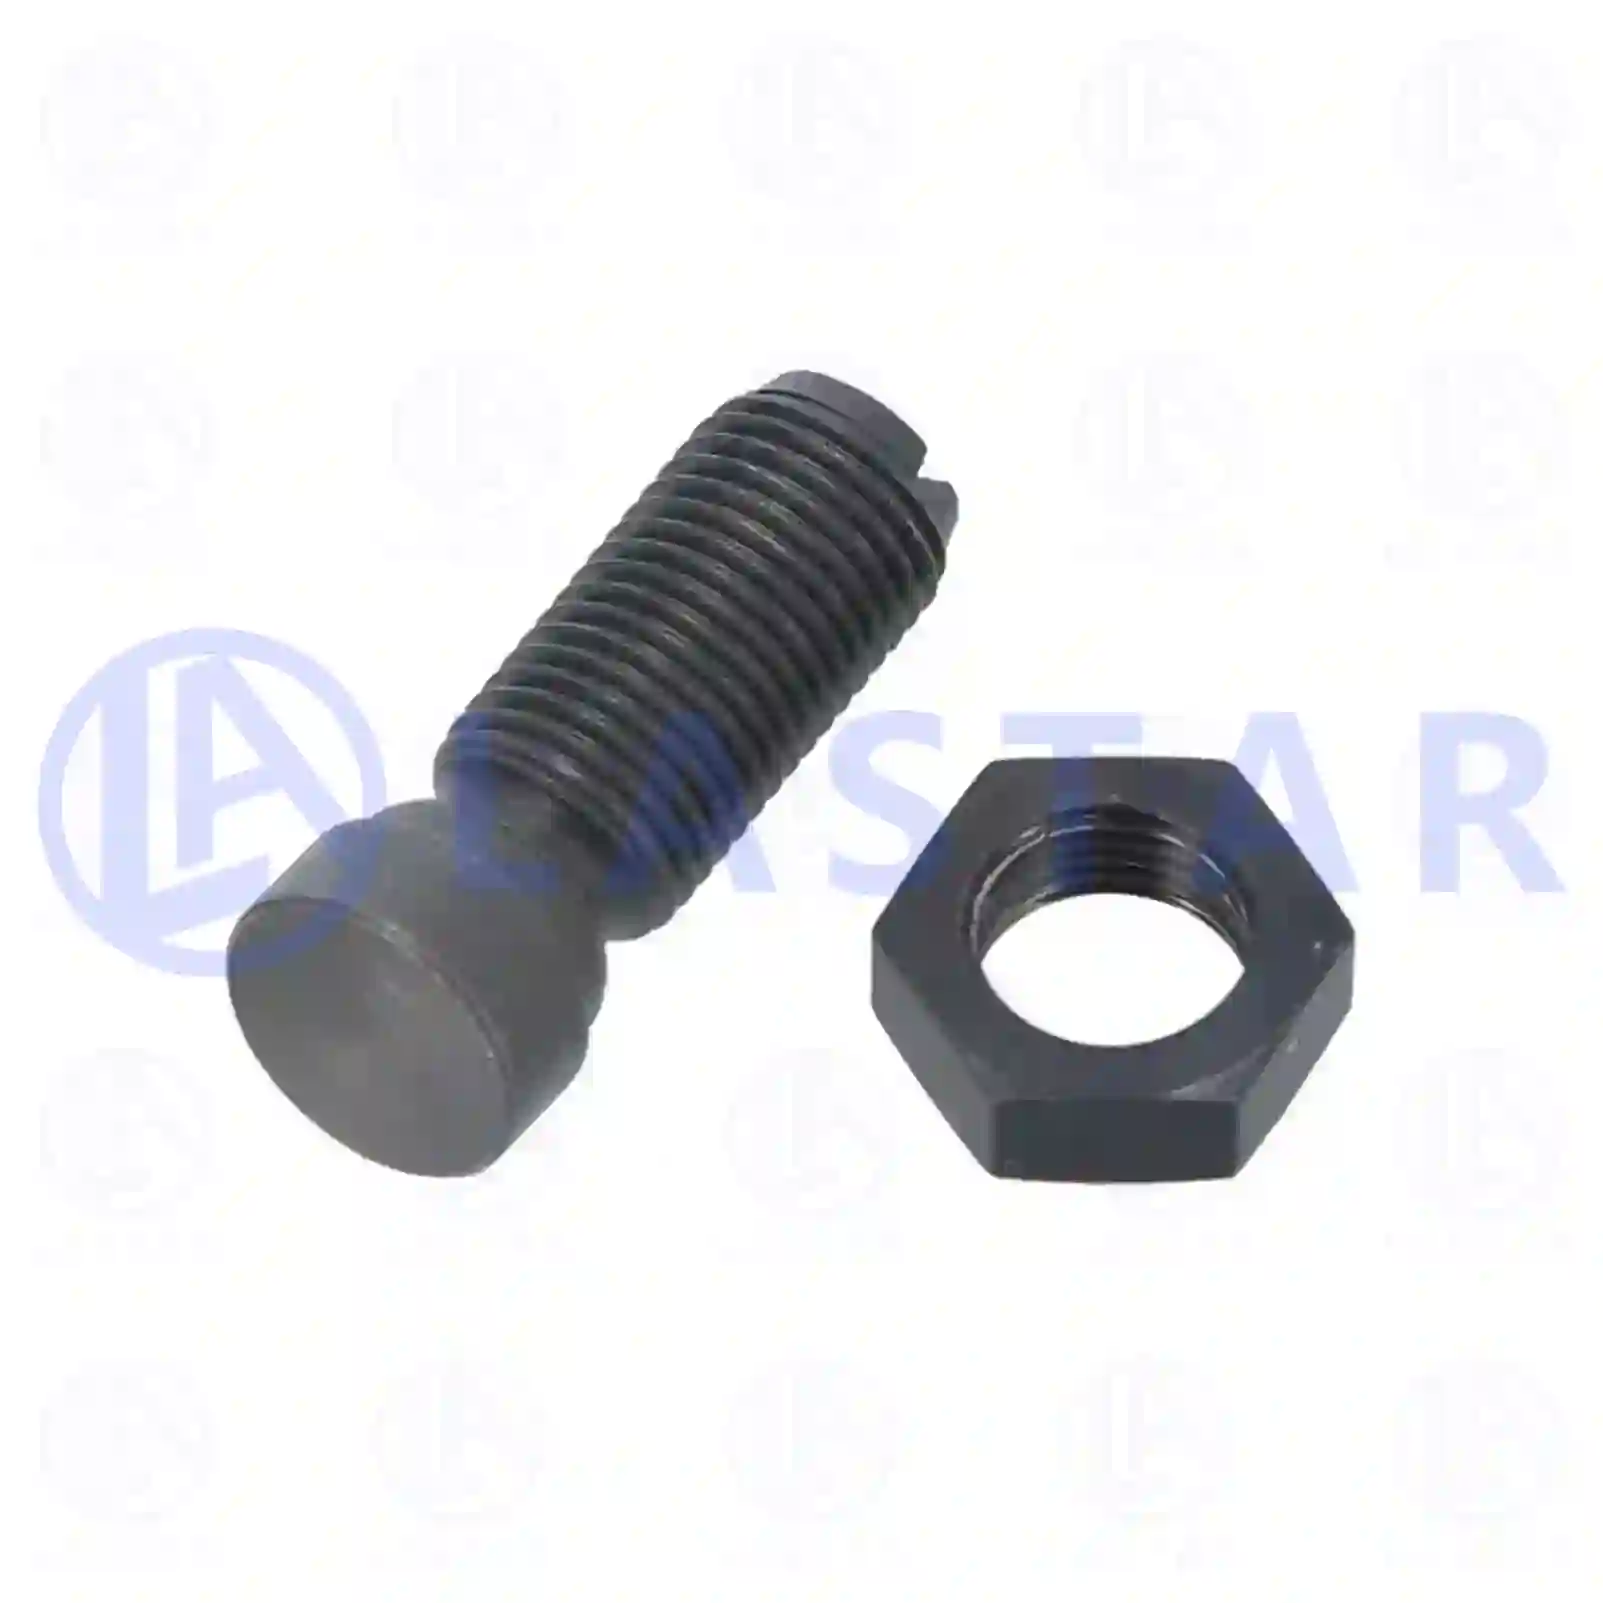  Adjusting screw, with nut || Lastar Spare Part | Truck Spare Parts, Auotomotive Spare Parts